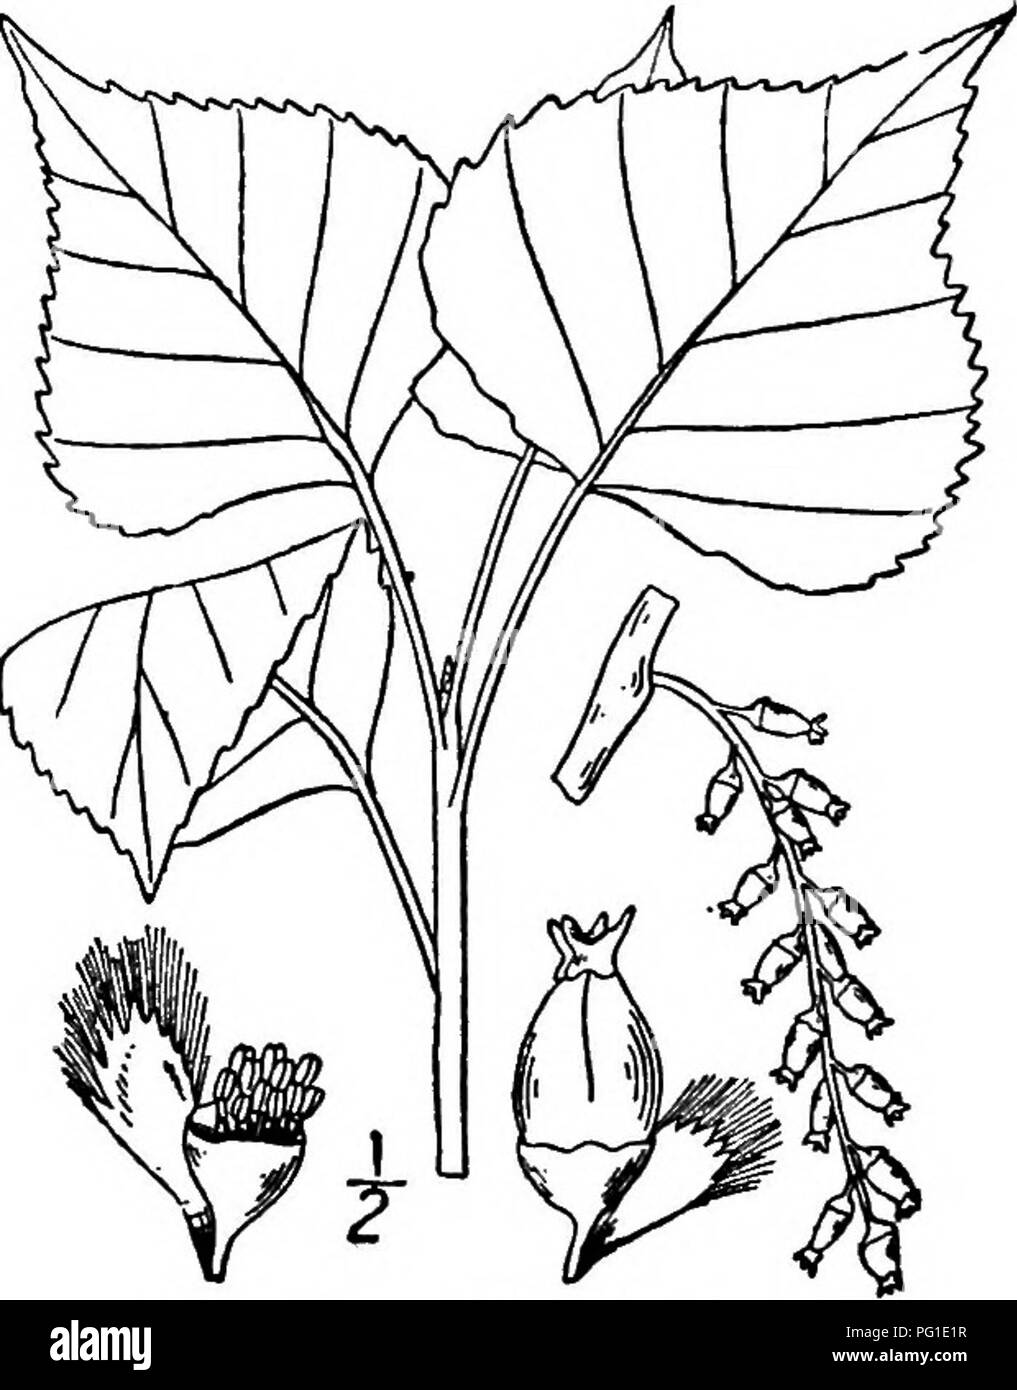 . North American trees : being descriptions and illustrations of the trees growing independently of cultivation in North America, north of Mexico and the West Indies . Trees. 176 The Poplars 12. BLACK POPLAR —Populus nigra Linnaeus This European poplar has been found in the valleys of the Hudson and Dela- ware rivers, doubtless spread from trees planted many years ago. The tree of the Hudson valley was supposed by F. A. Michaux to be distinct from the European black poplar, and was described by him under the name P. htcdsonica. Little is known of it in either valley at the present time. The Bl Stock Photo